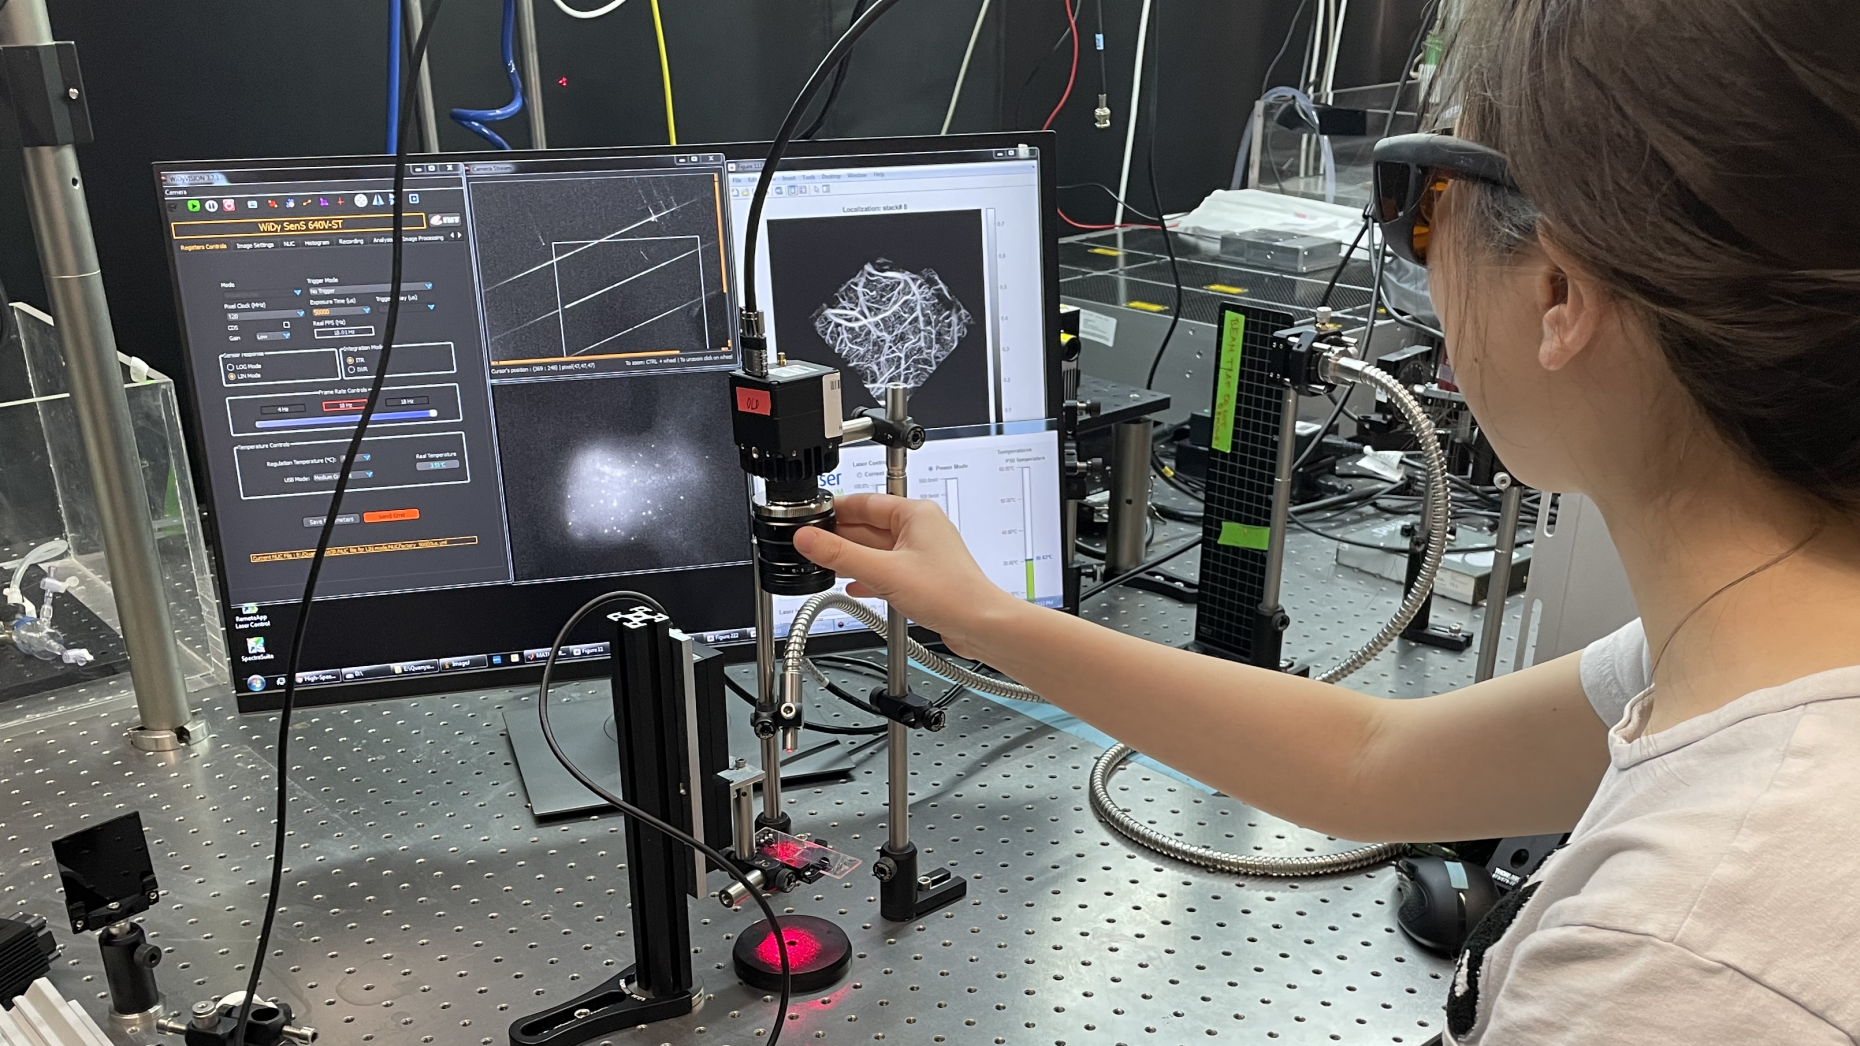 A woman looks at two images of brains on screens in the lab